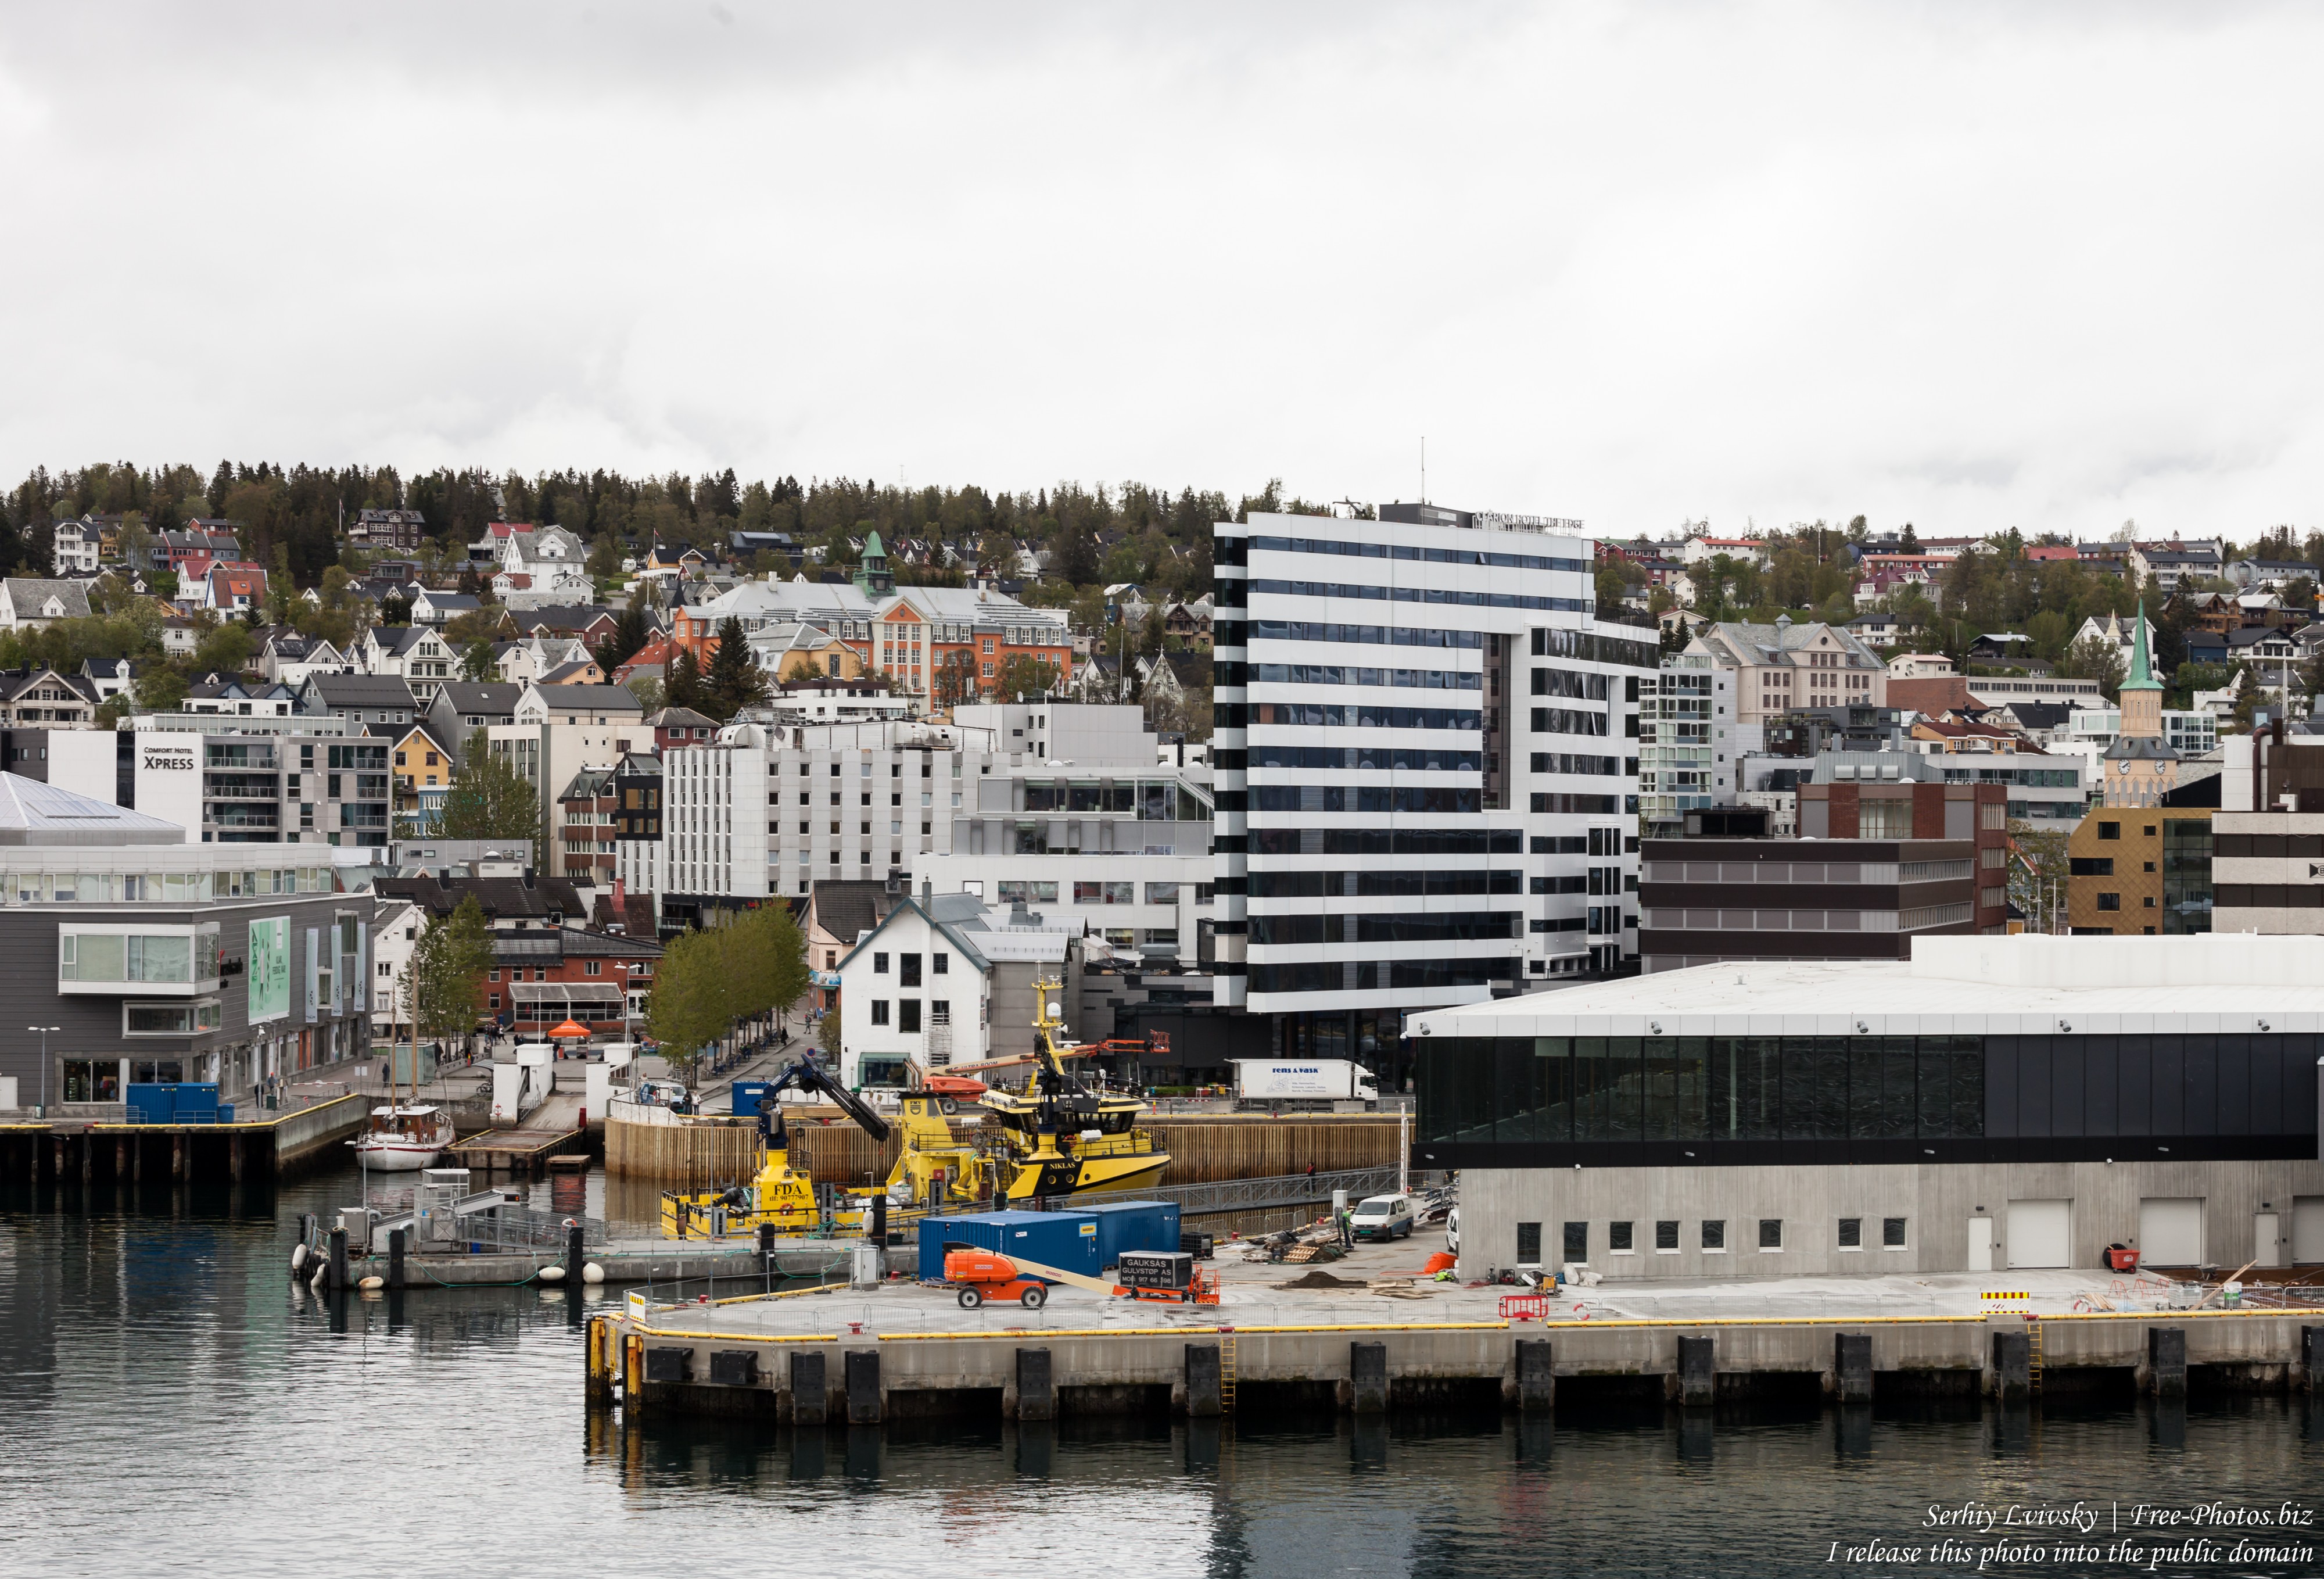 Tromso, Norway, photographed in June 2018 by Serhiy Lvivsky, picture 34